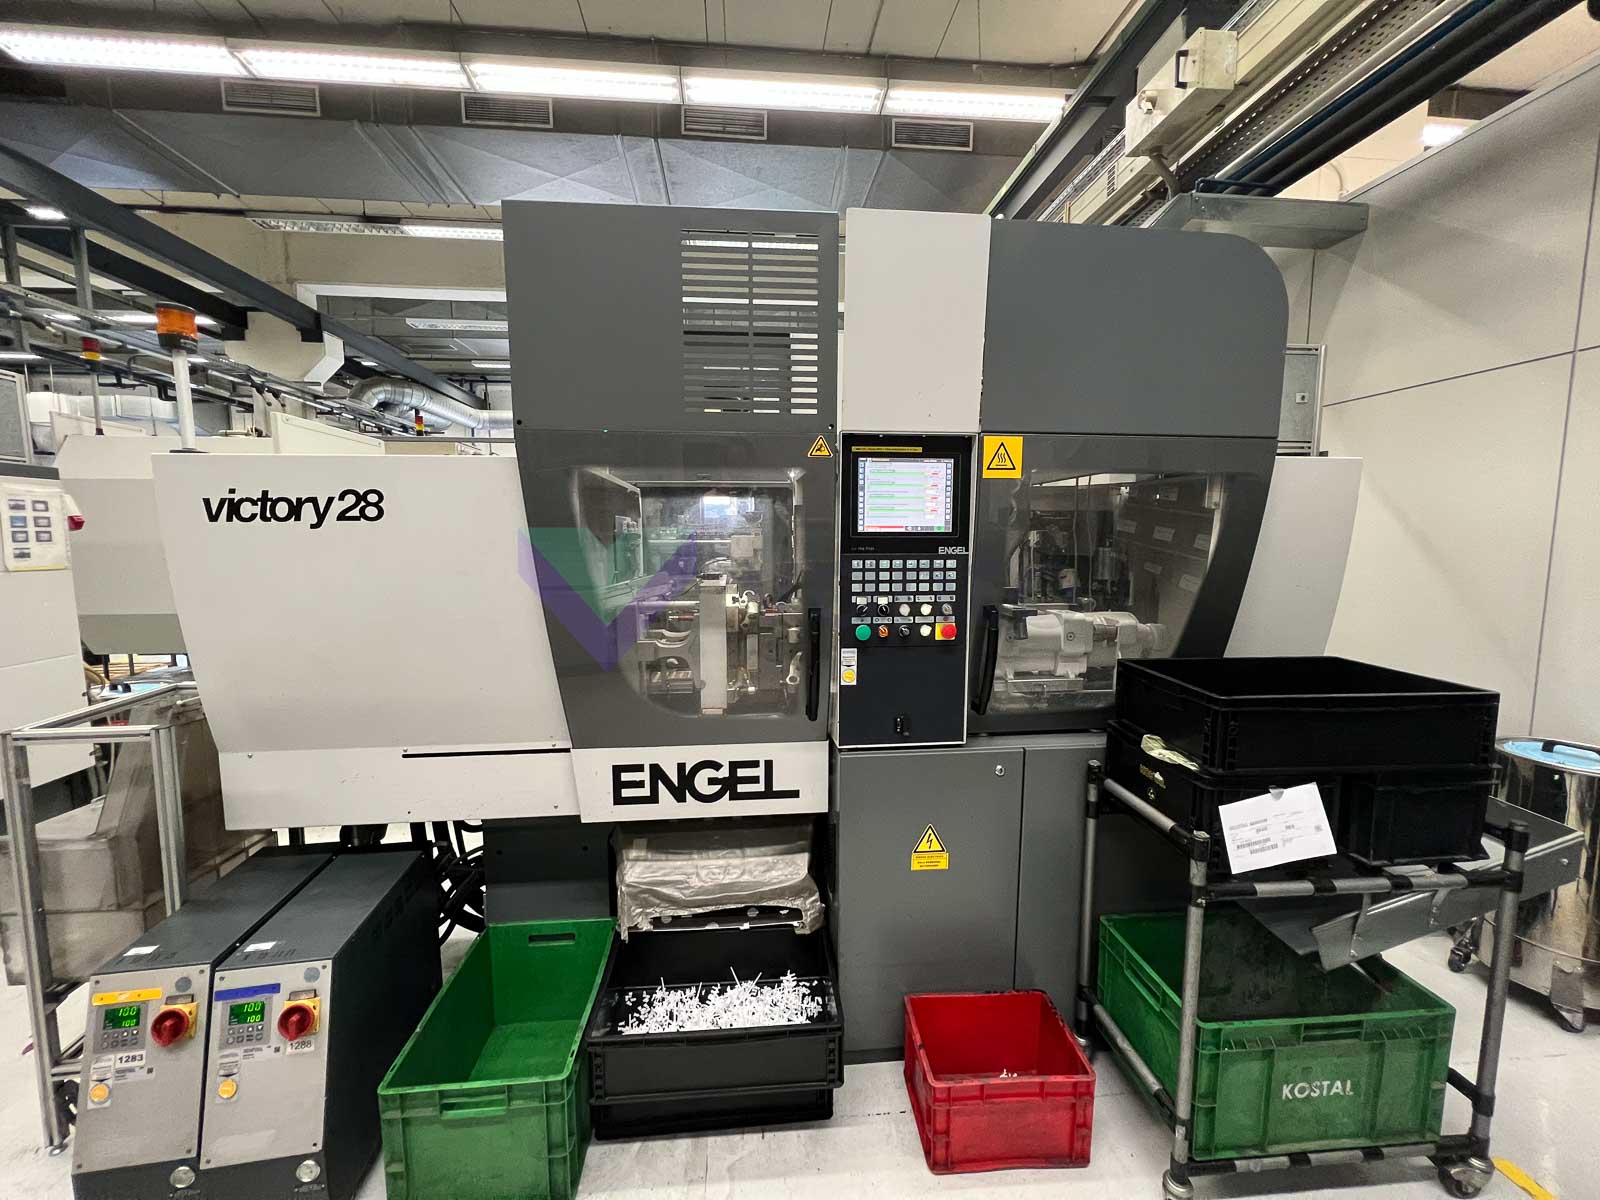 ENGEL VICTORY VC 80 / 28 TECH 28t injection molding machine (2007) id10894